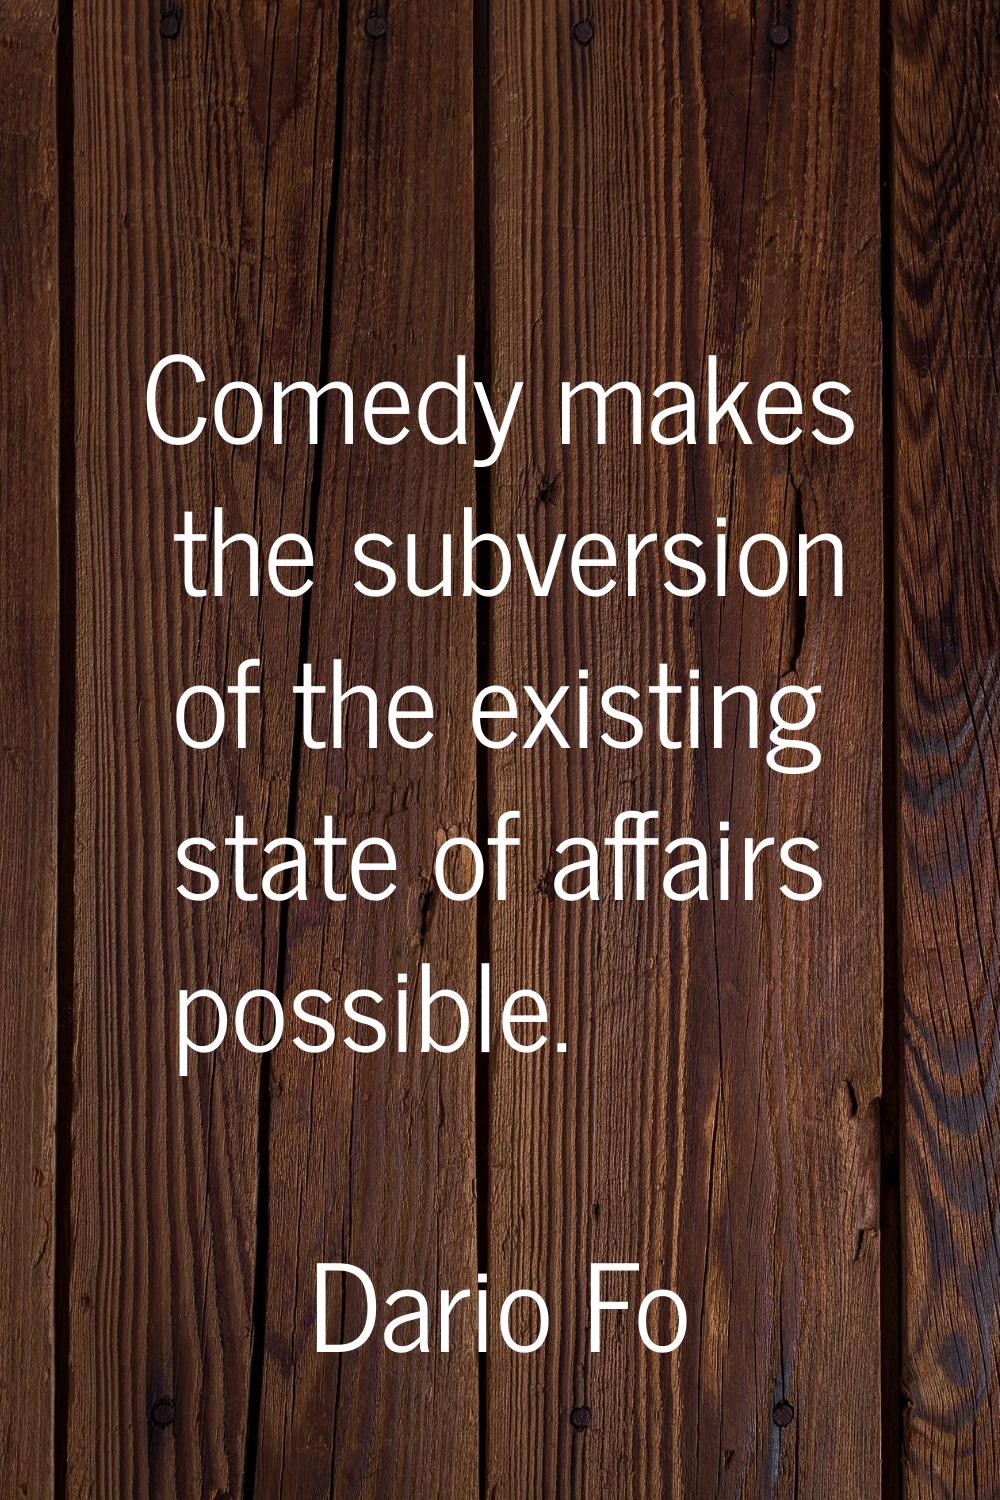 Comedy makes the subversion of the existing state of affairs possible.